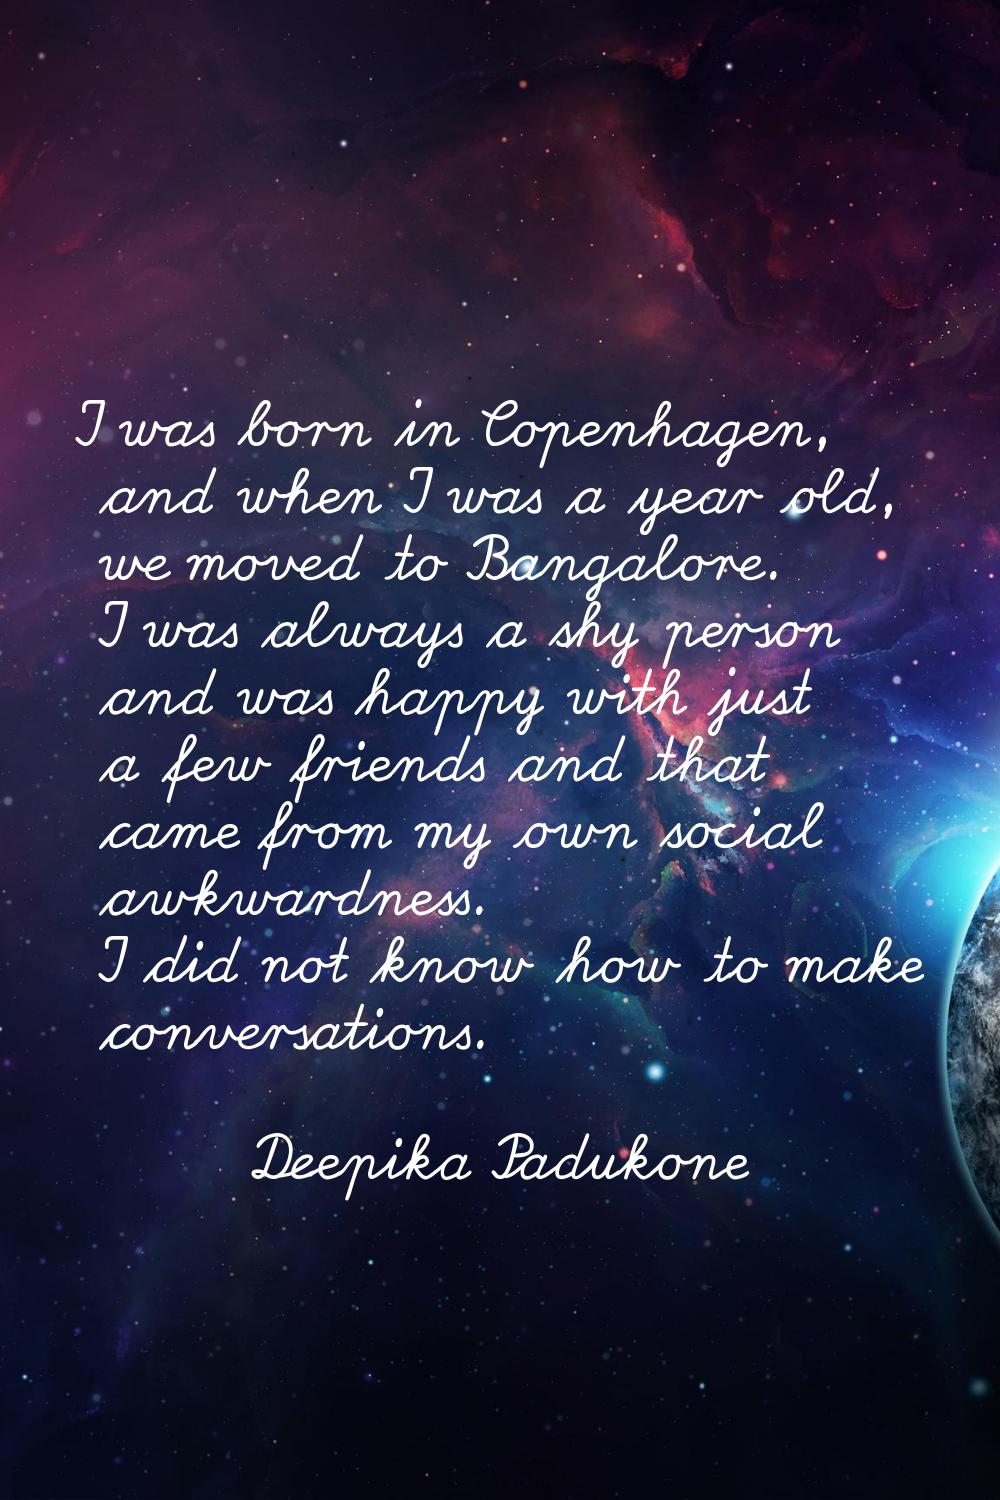 I was born in Copenhagen, and when I was a year old, we moved to Bangalore. I was always a shy pers